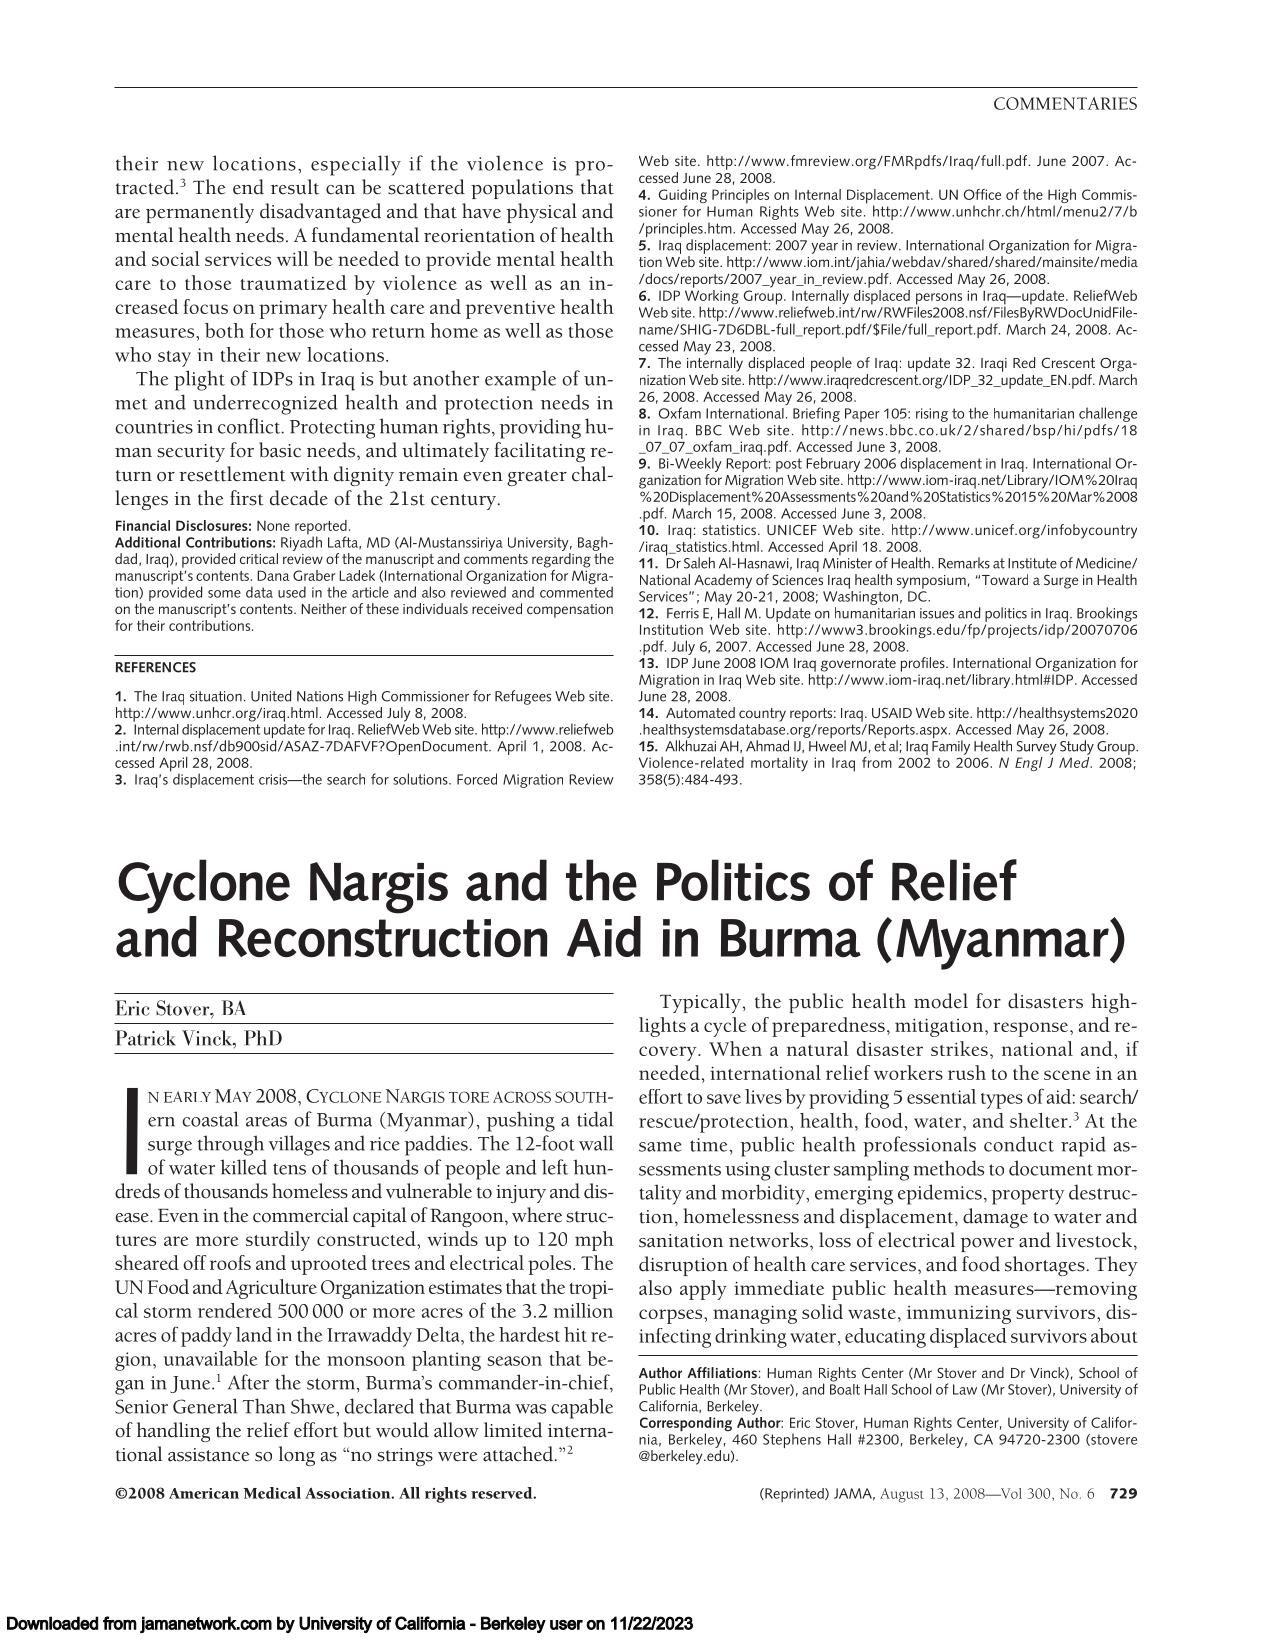 Cyclone Nargis and the Politics of Relief